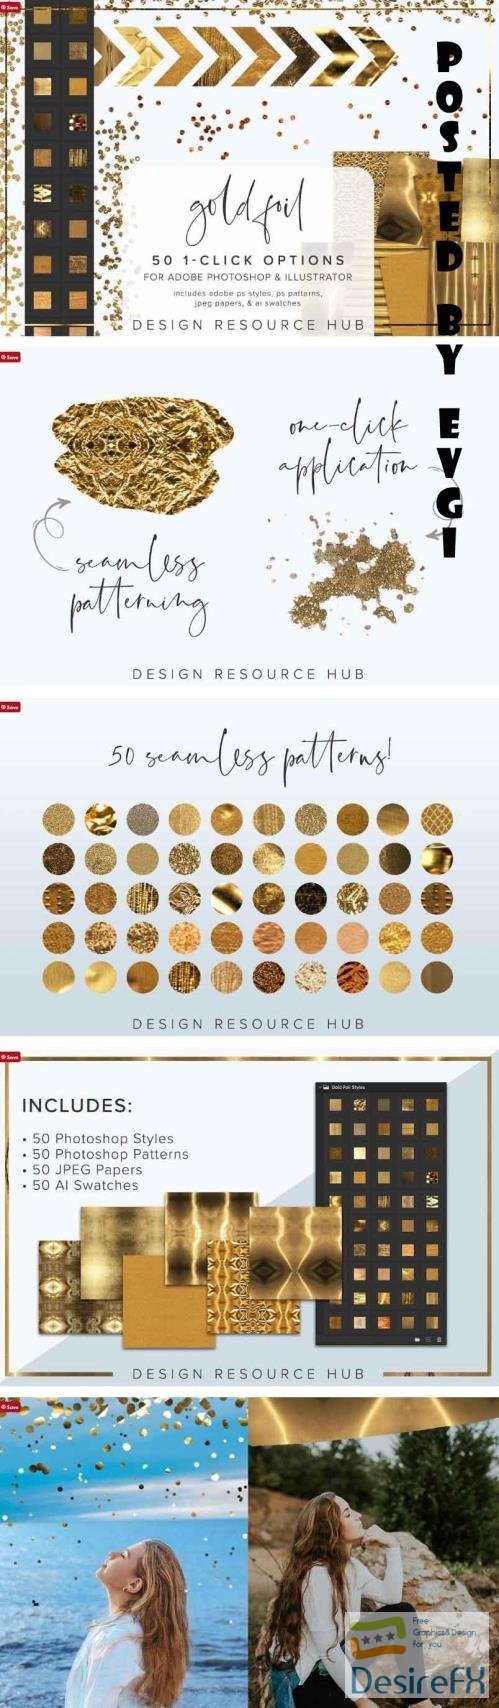 Gold Foil Photoshop Style Pack - 6966029